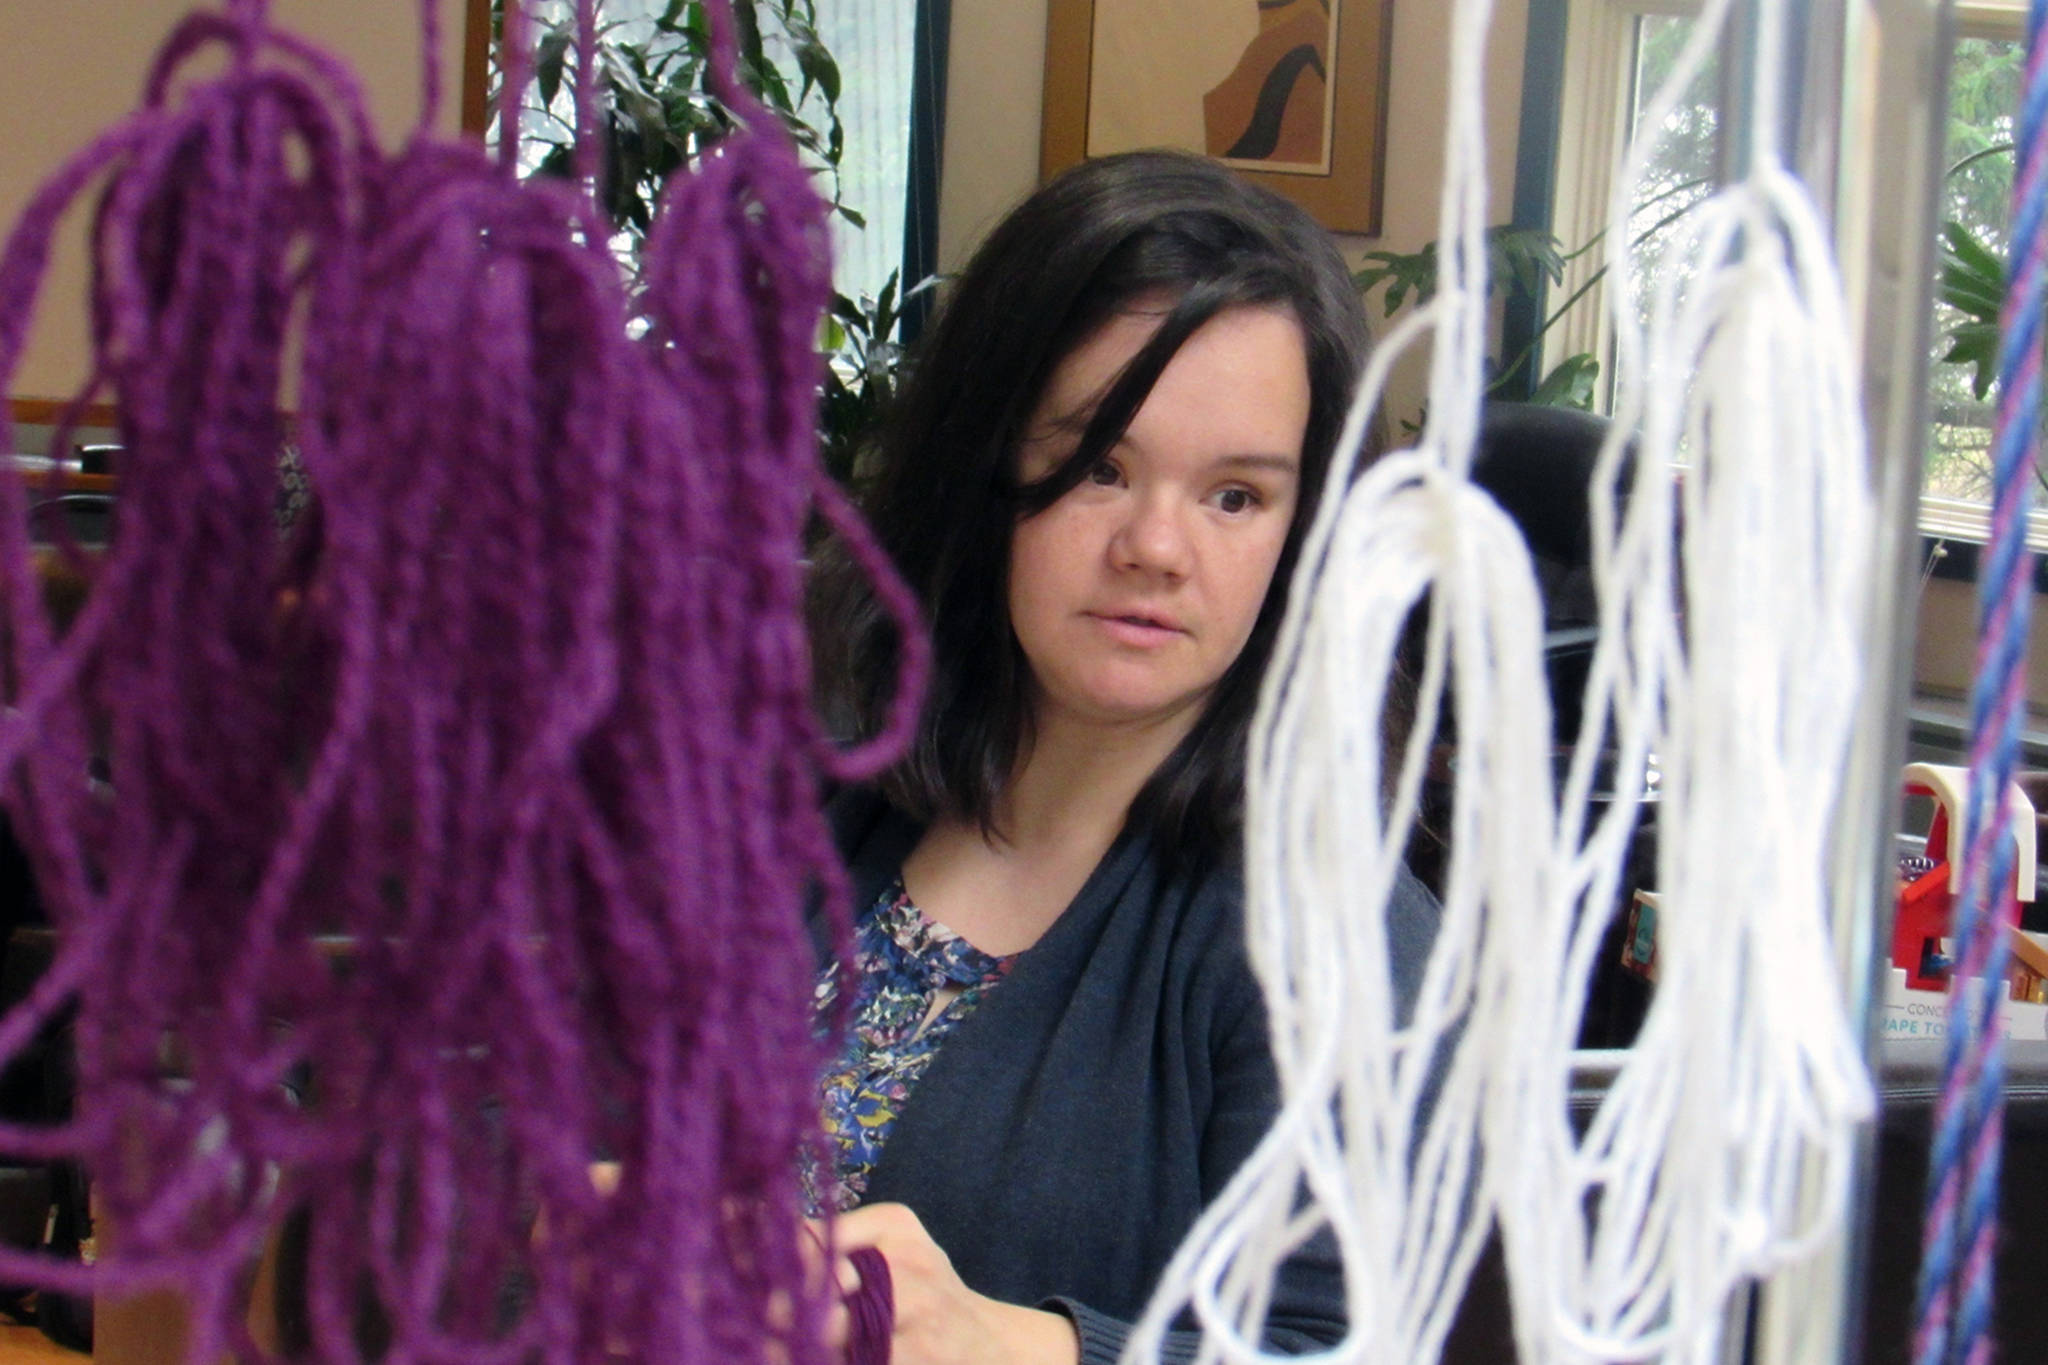 There are new plans for the weaving project to honor violence survivors